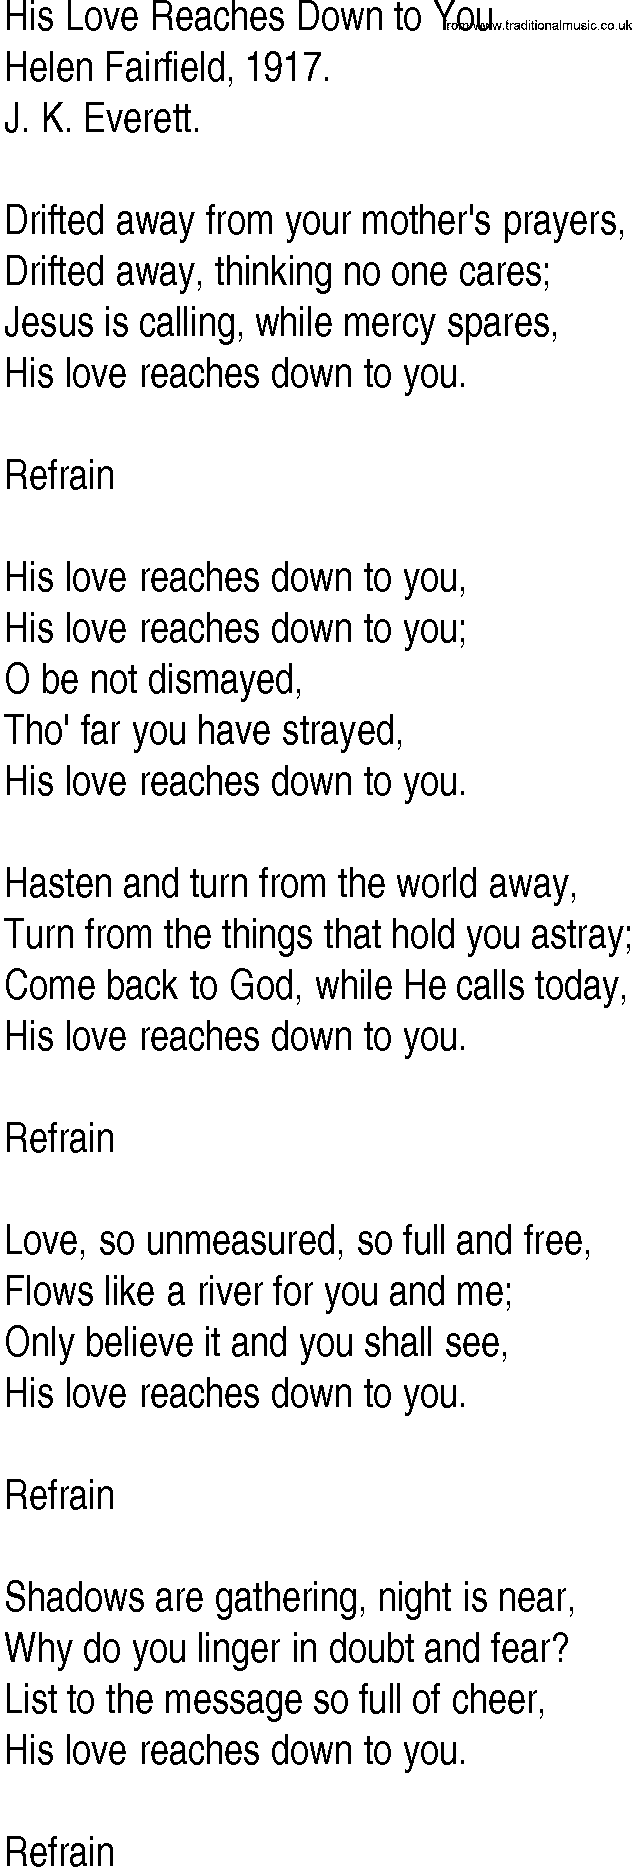 Hymn and Gospel Song: His Love Reaches Down to You by Helen Fairfield lyrics